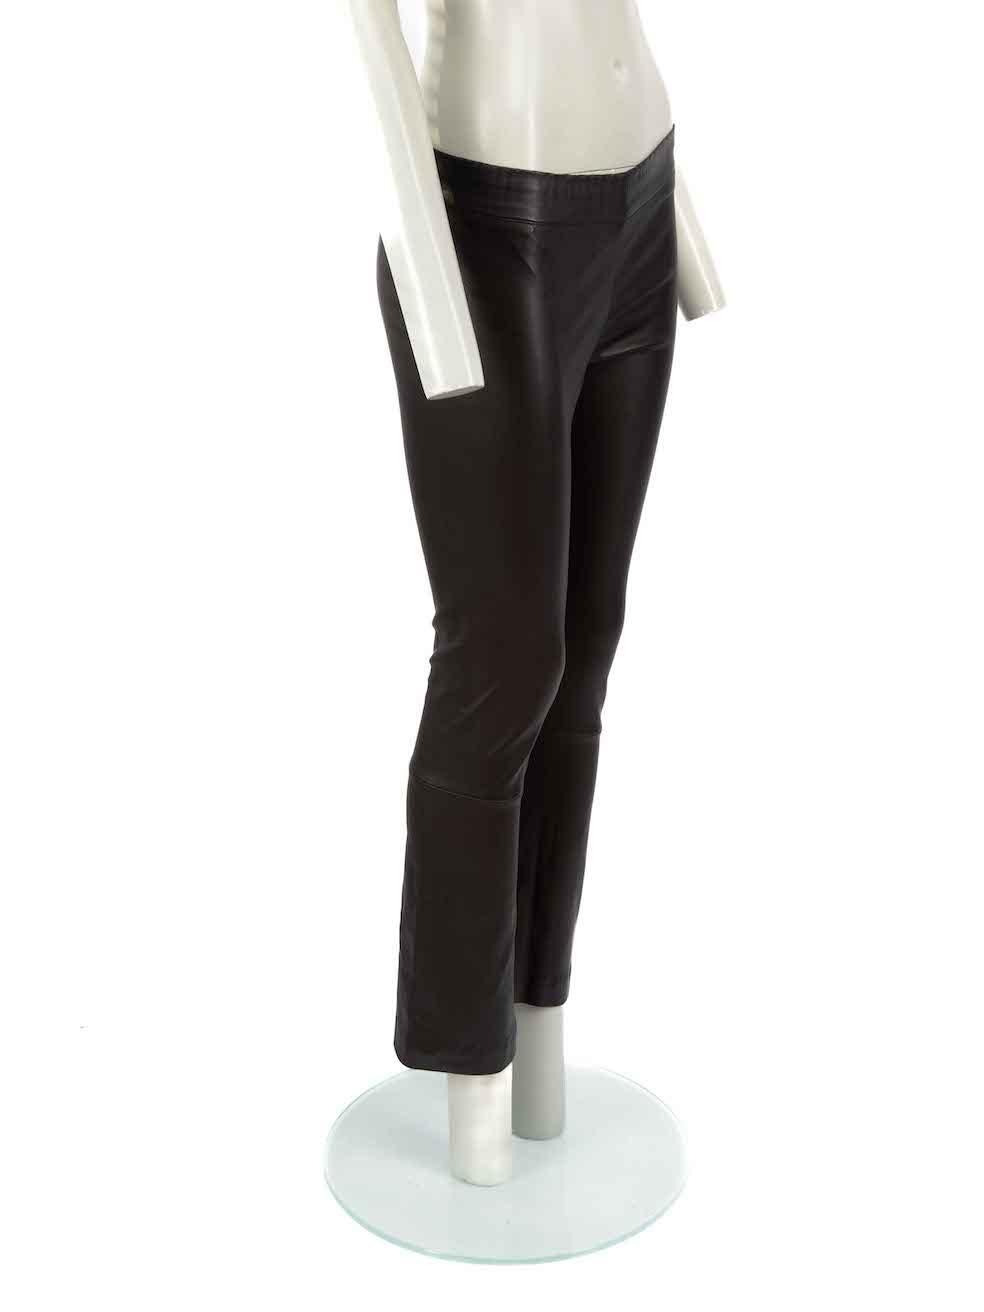 CONDITION is Very good. Hardly any visible wear to trousers is evident on this used The Row designer resale item.
 
Details
Black
Leather
Bootcut trousers
Mid rise
Elasticated waistband
 
Made in USA
 
Composition
100% Lambskin
 
Care instructions: